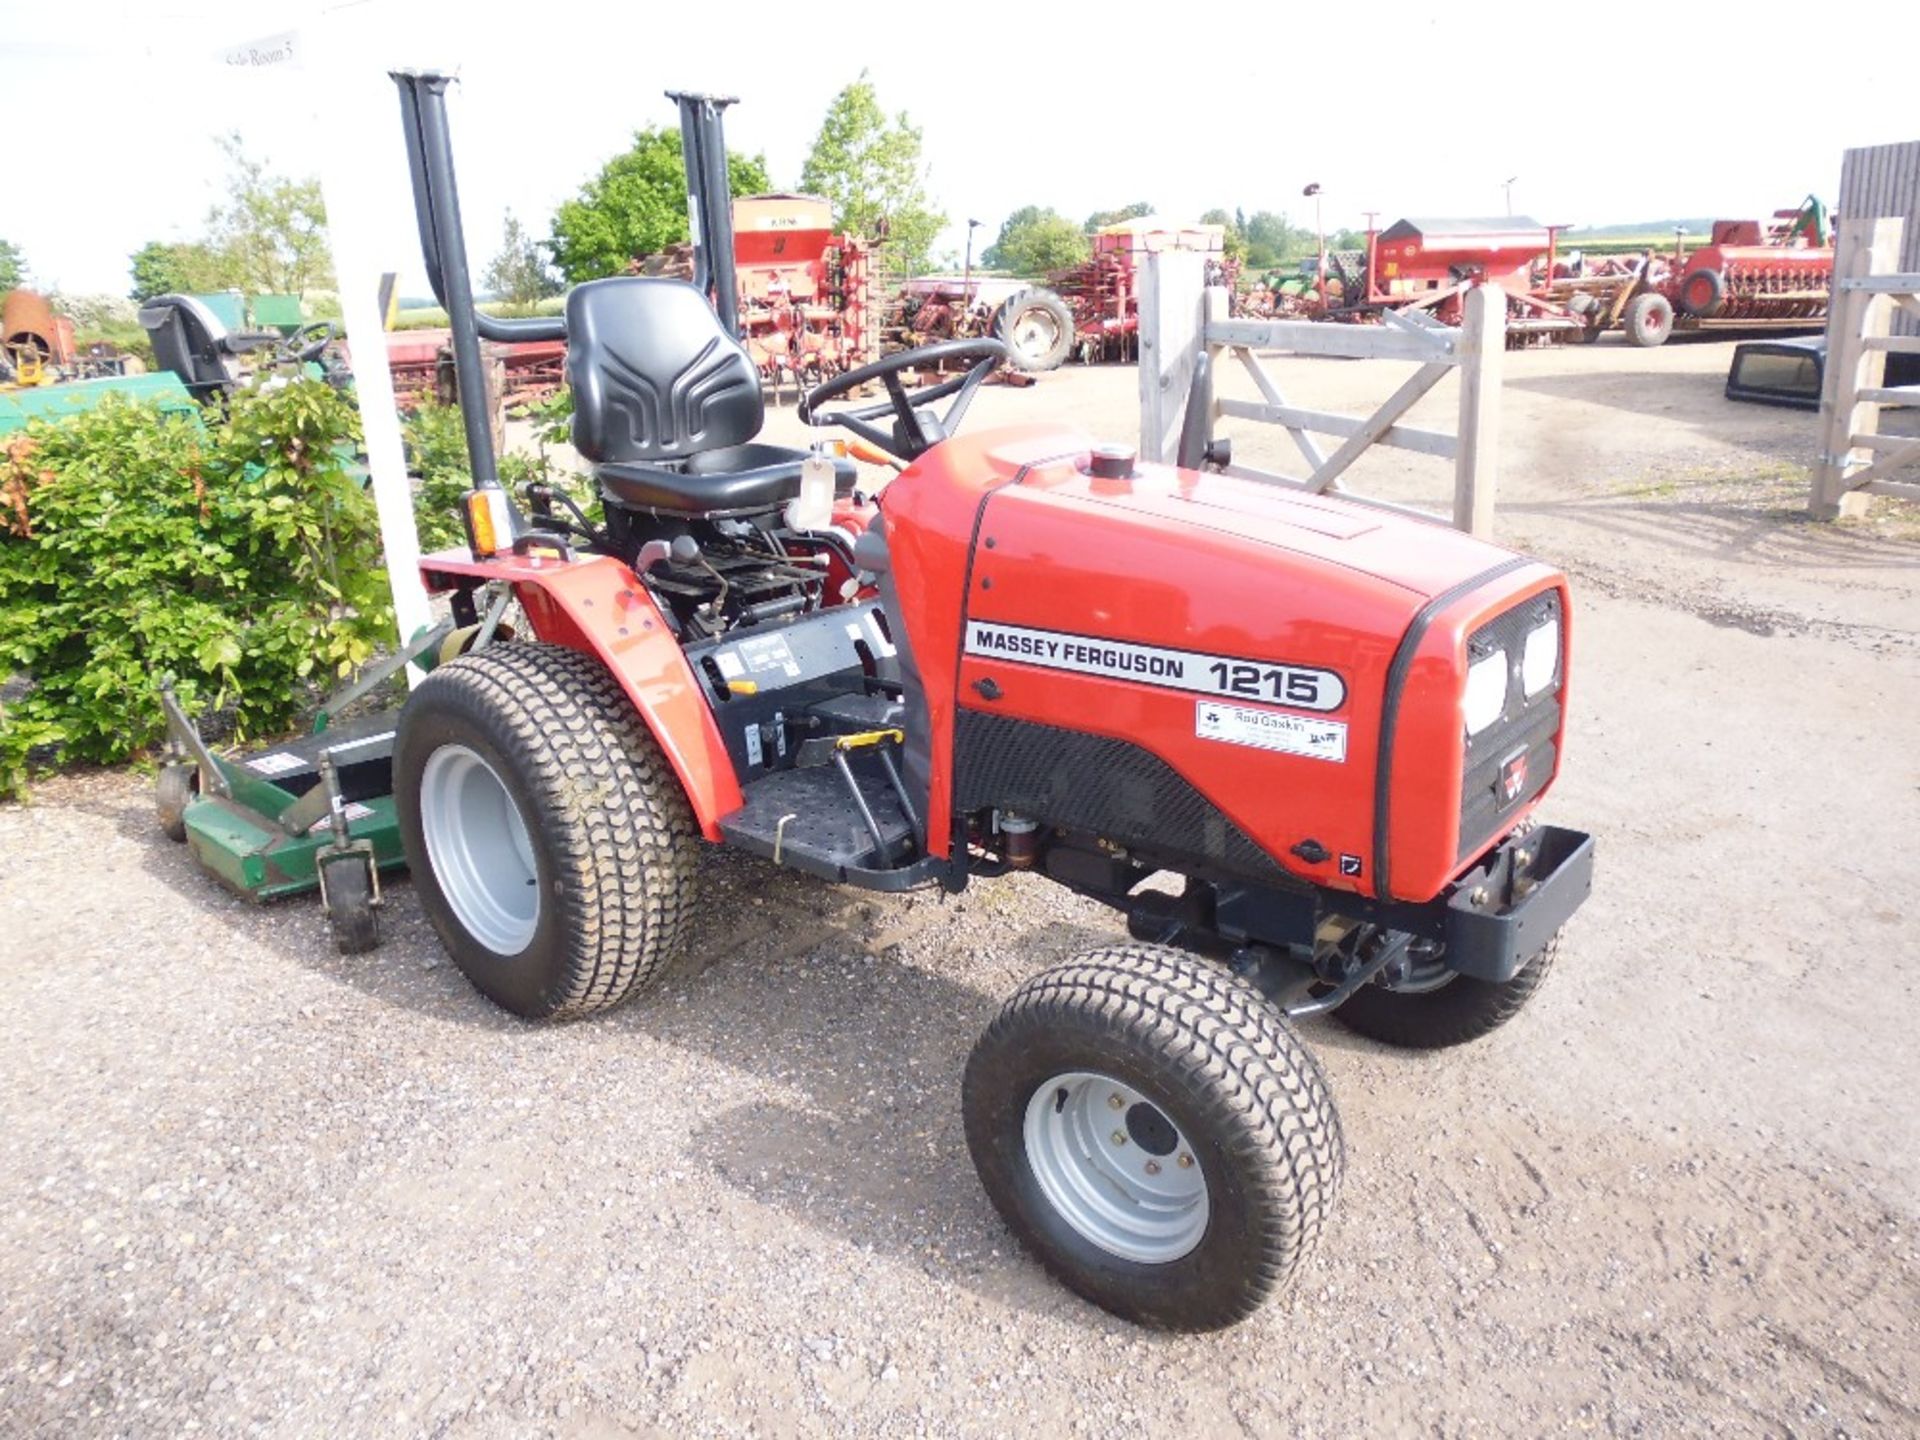 Massey Ferguson 1215 4WD compact tractor. 147 hours. Serial number N-V4902. 29 x 12.00-15.